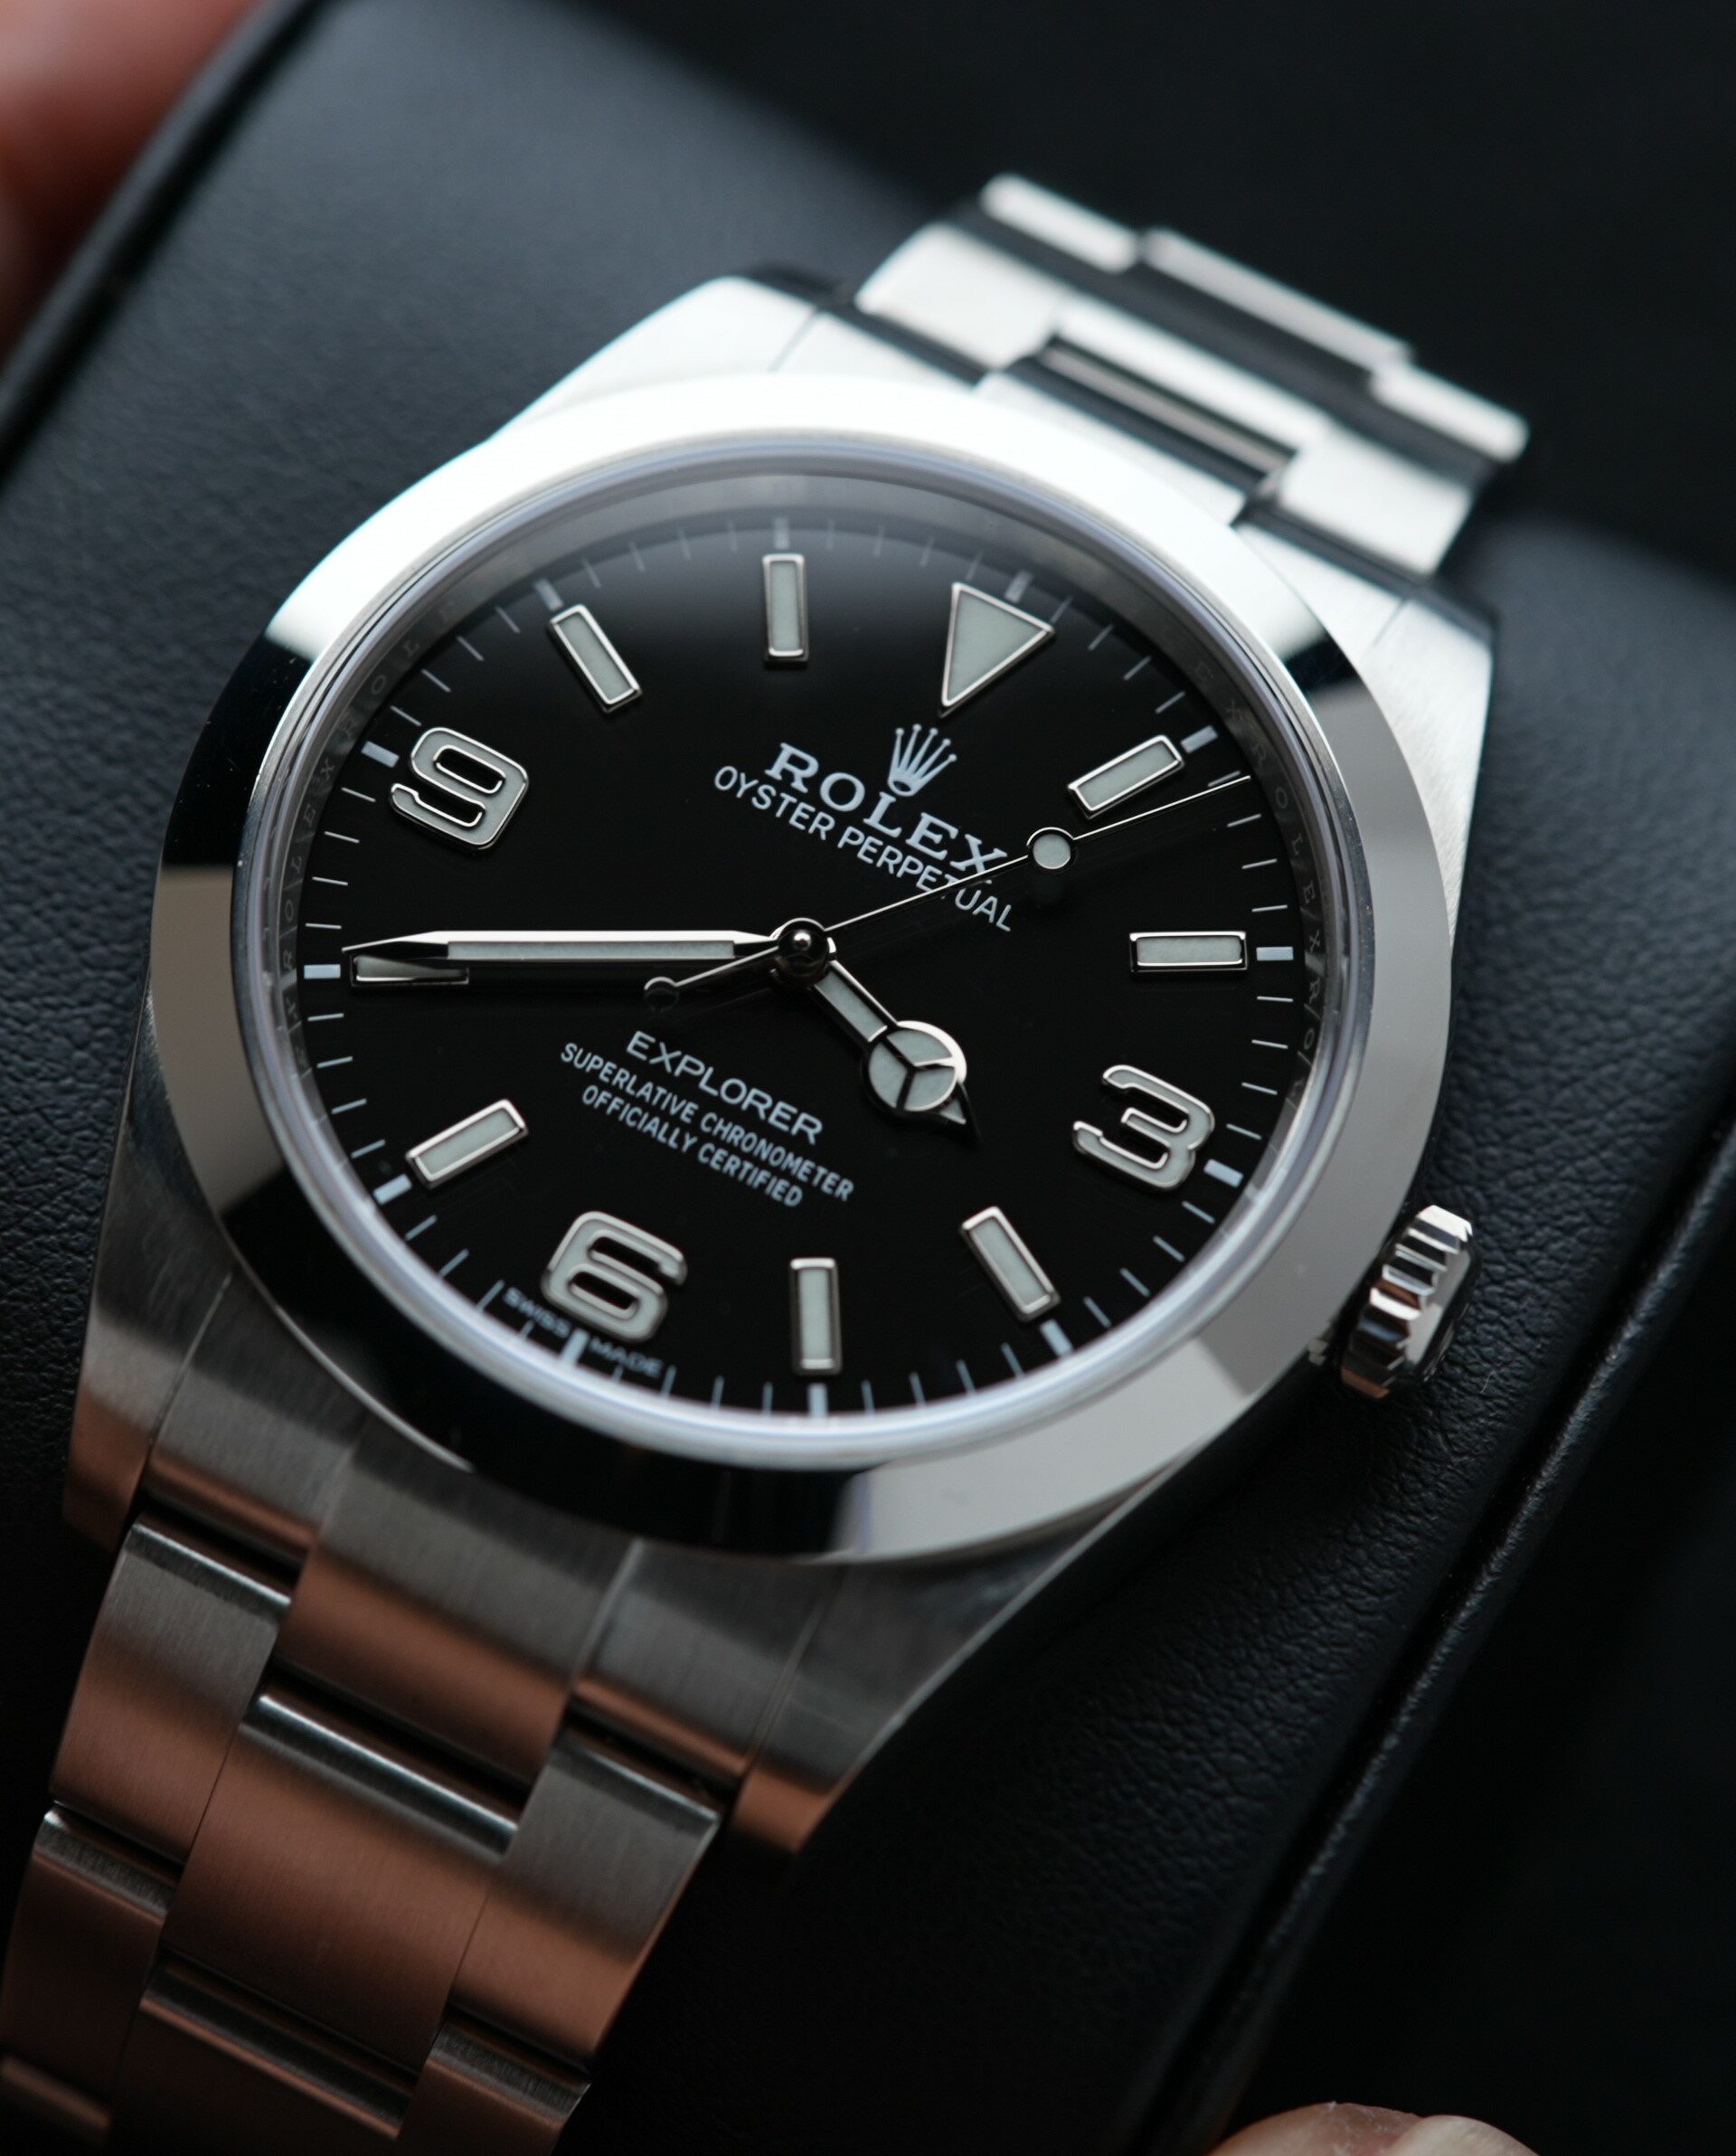 Rolex Explorer 214270 39mm watch being held while on cushion.